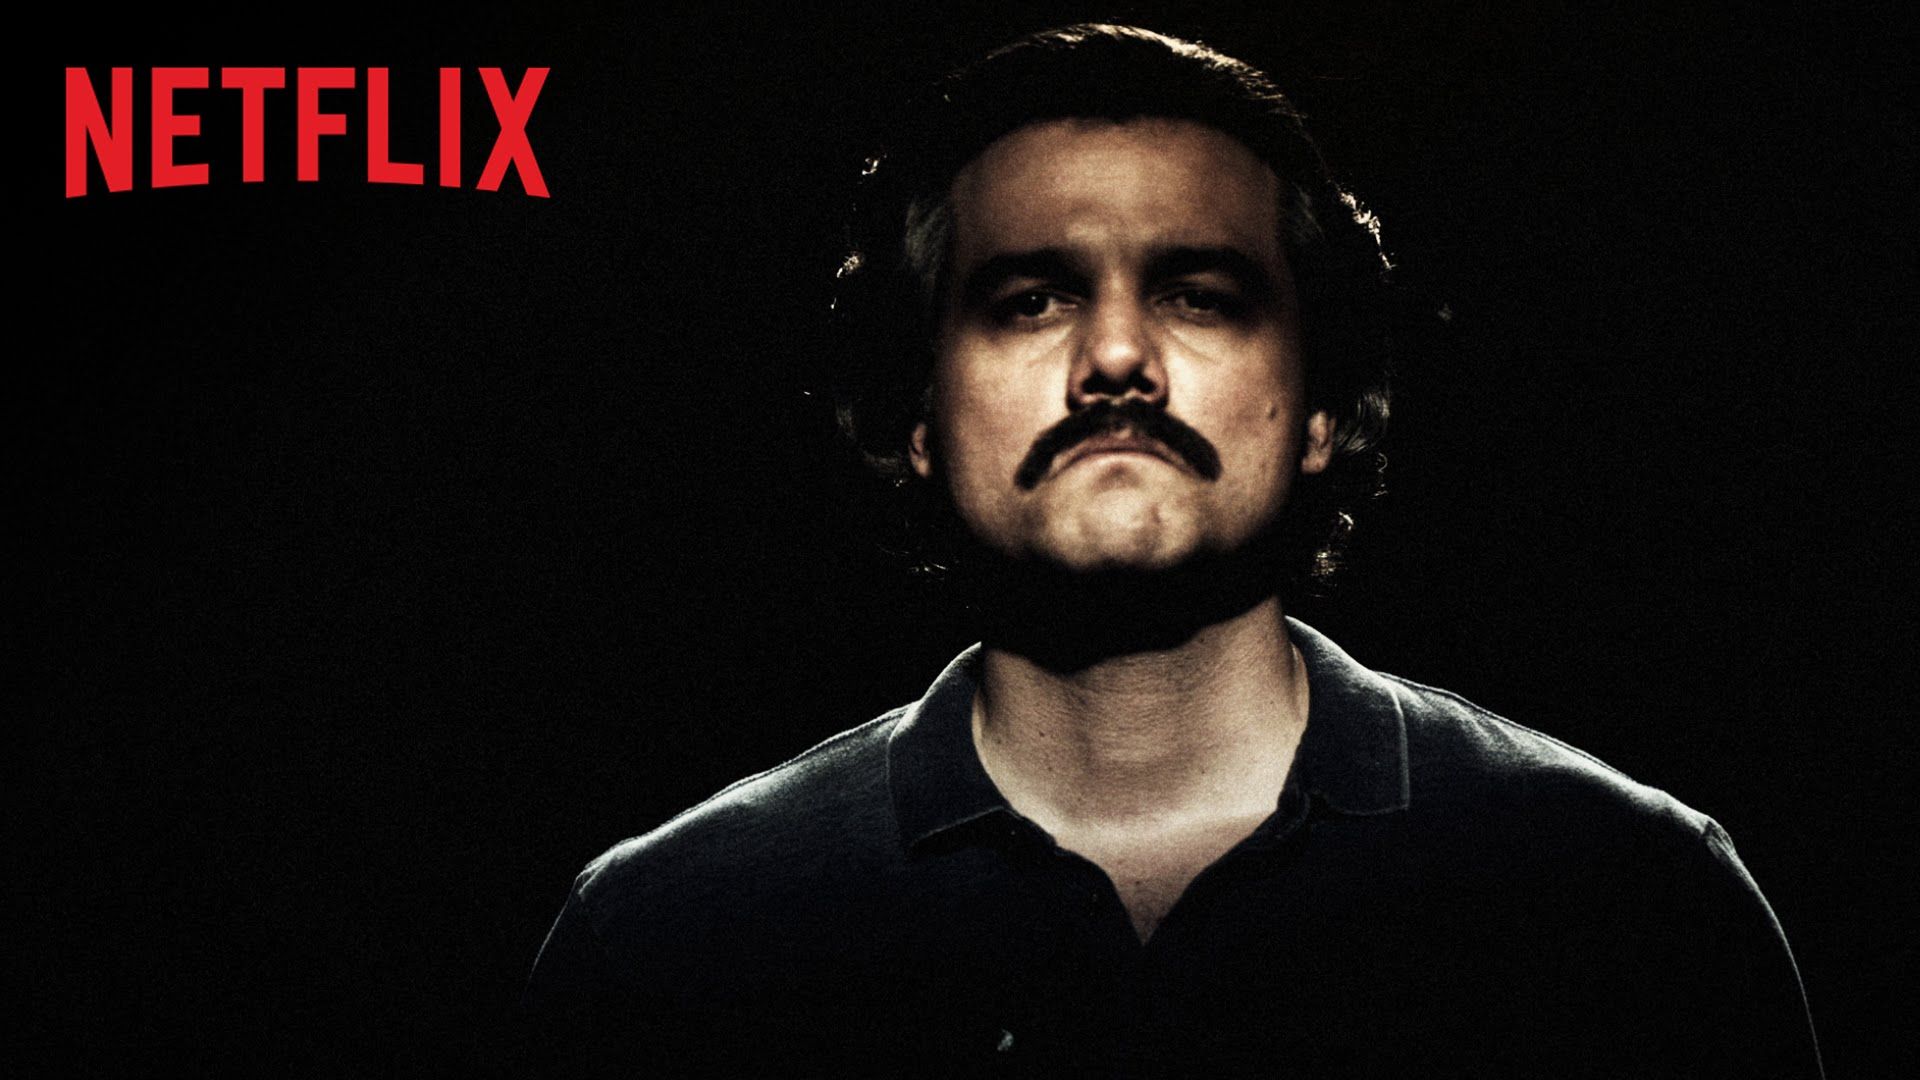 Pablo Escobar's son lists 28 things that were factually wrong